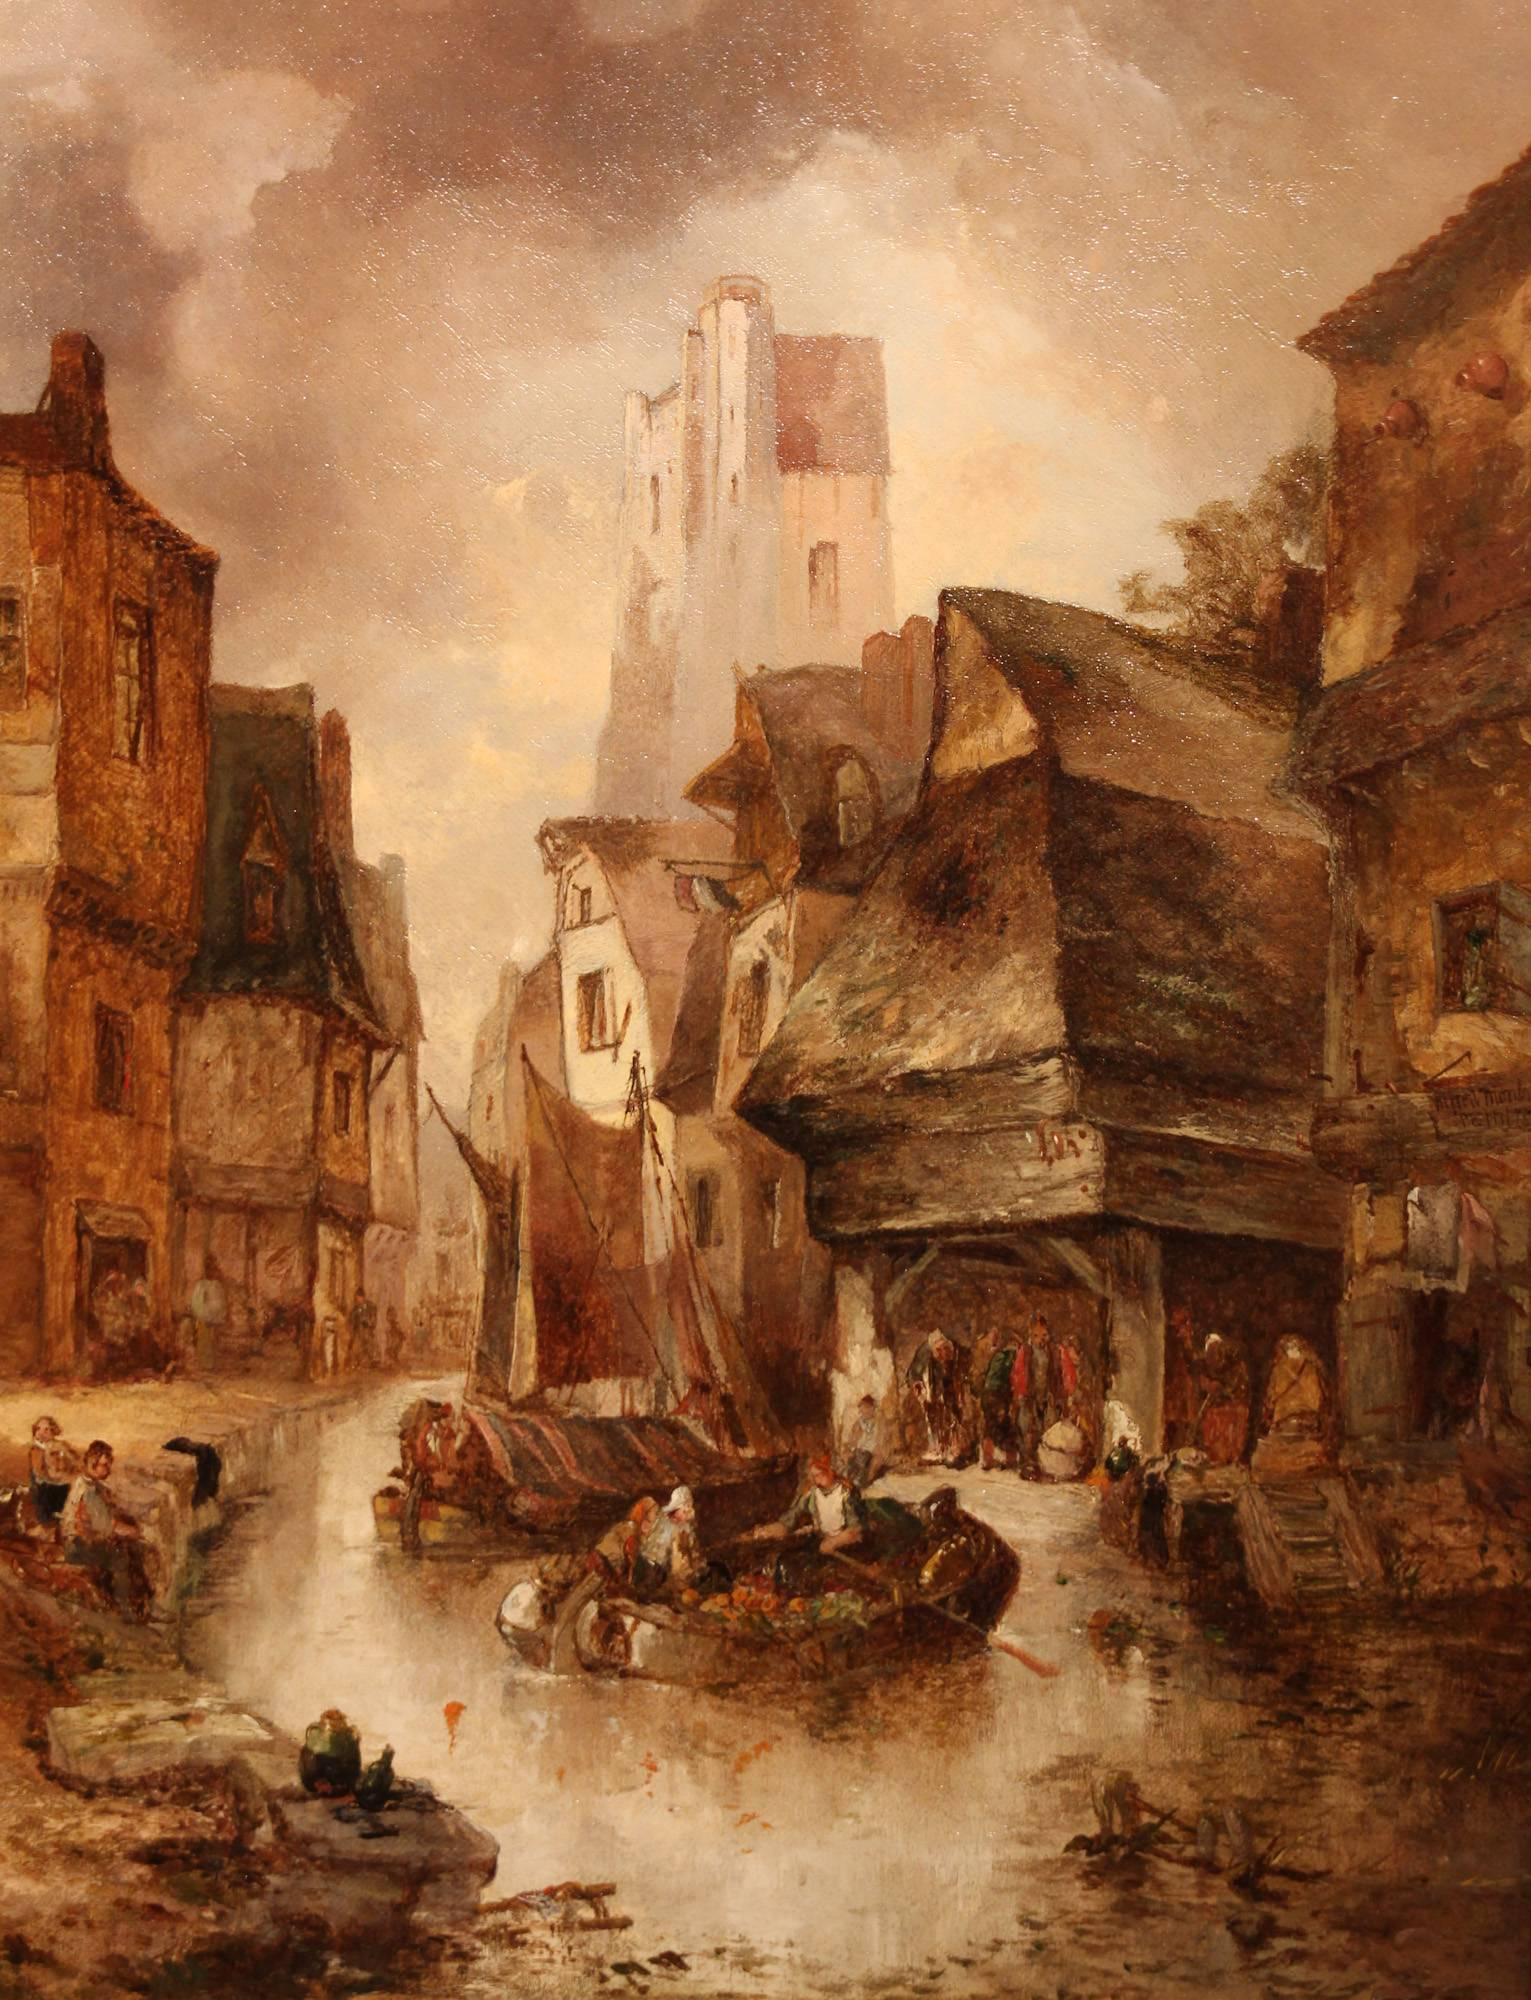 Pair of oil paintings "Continental Townscapes" by Alfred Montague. Alfred Montague exhibited 1832-1883, a leading member of the Royal Society of British Artists. Both oil on canvas, 18 x 14" signed, in original frames.

All of the